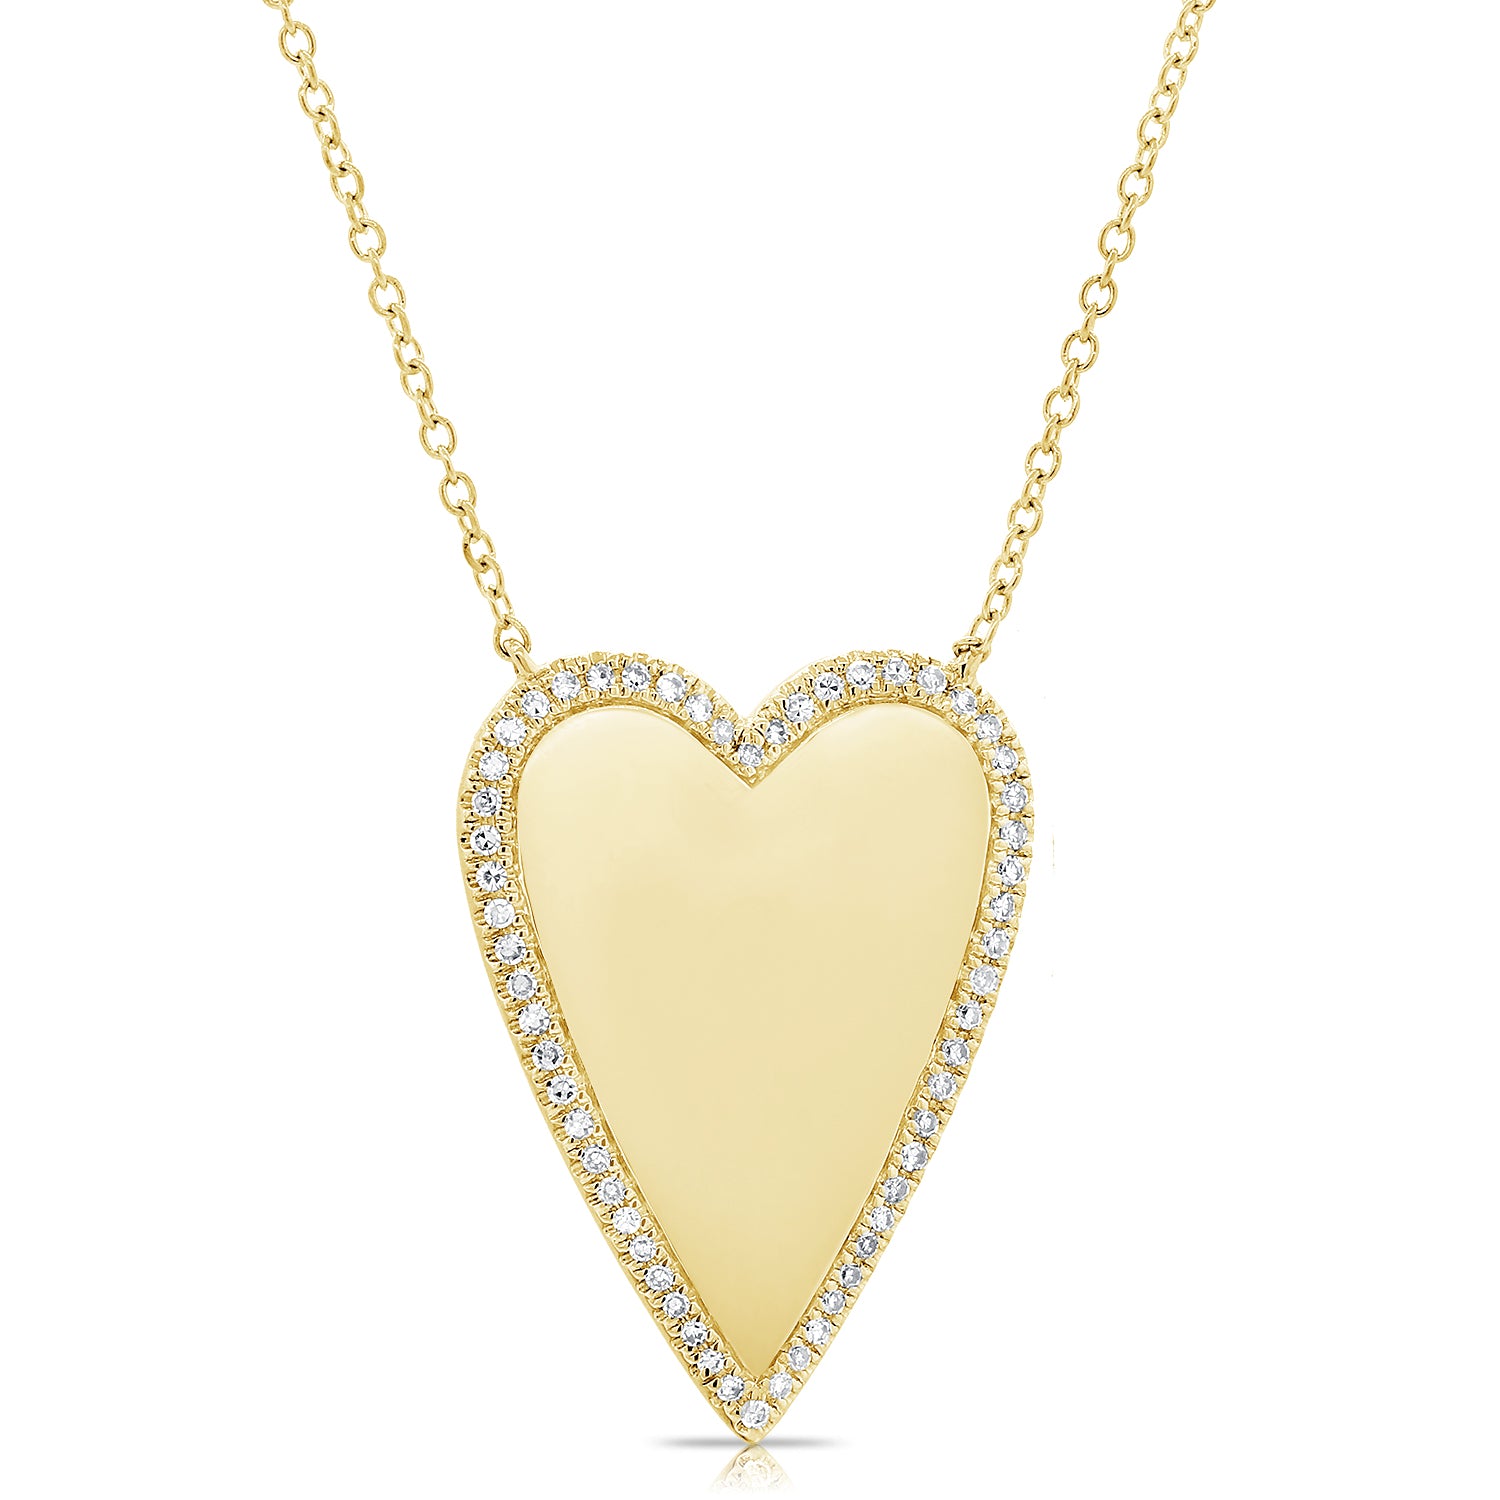 Jumbo Gold Heart Necklace with Pave Outline